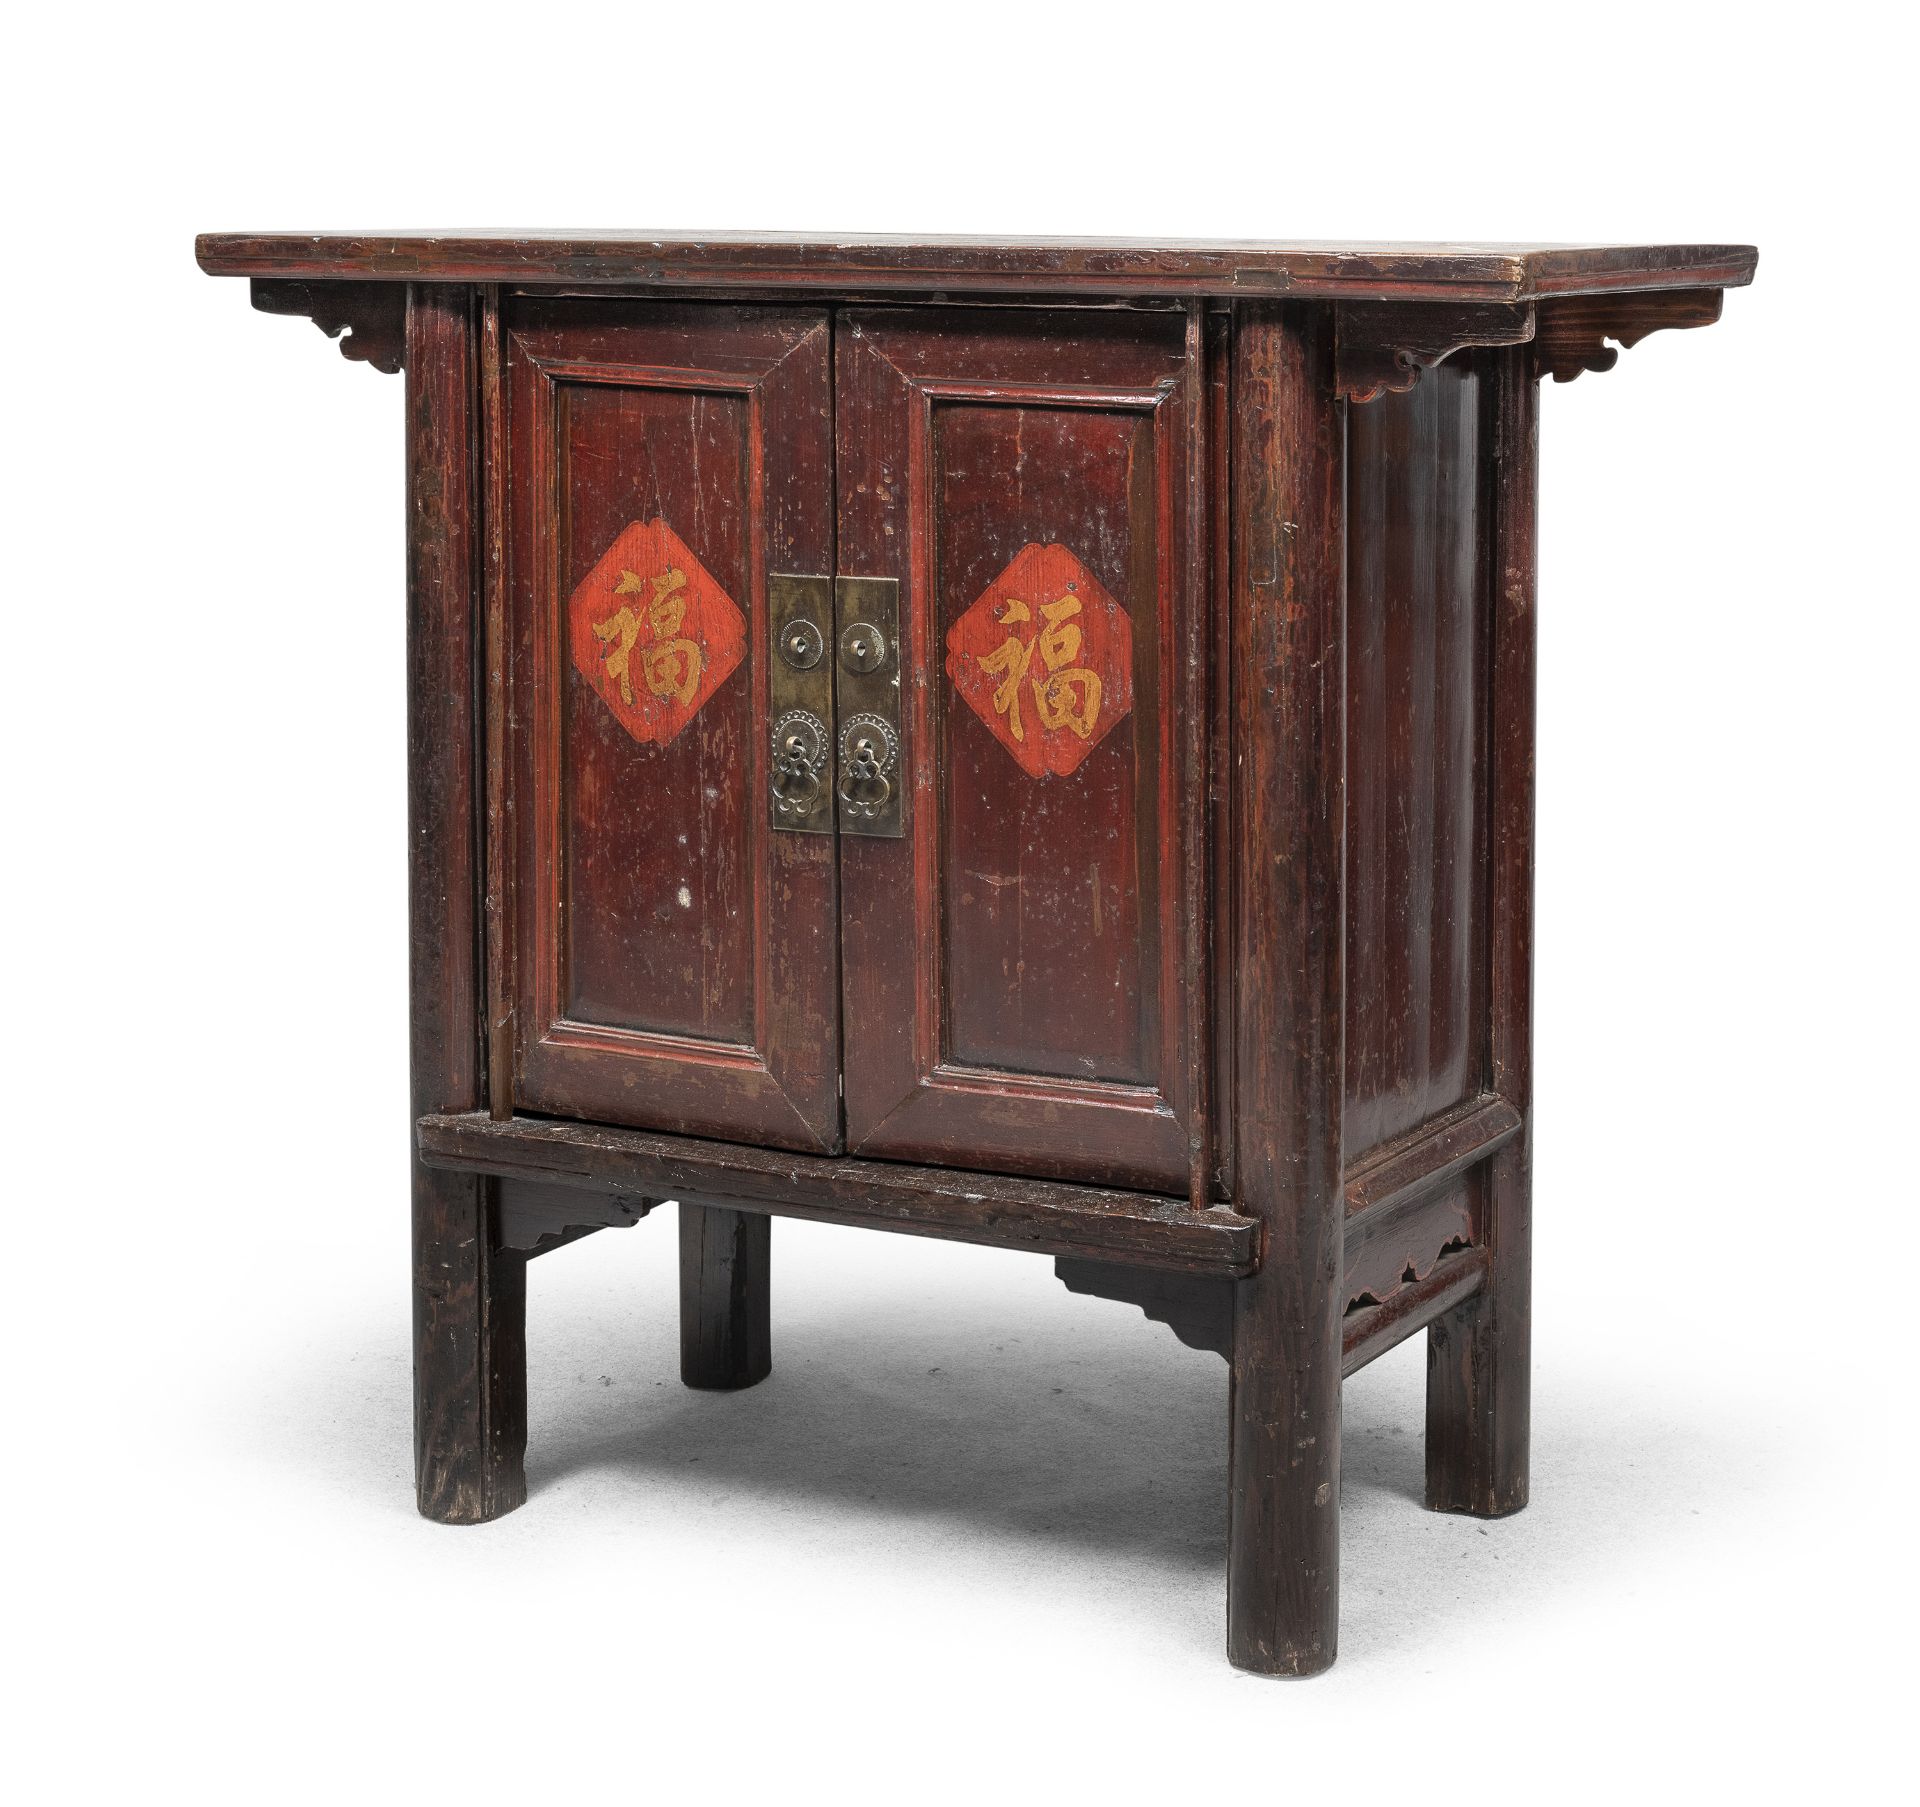 A CHINESE PAINTED YUMO WOOD SIDEBOARD. 19TH CENTURY.